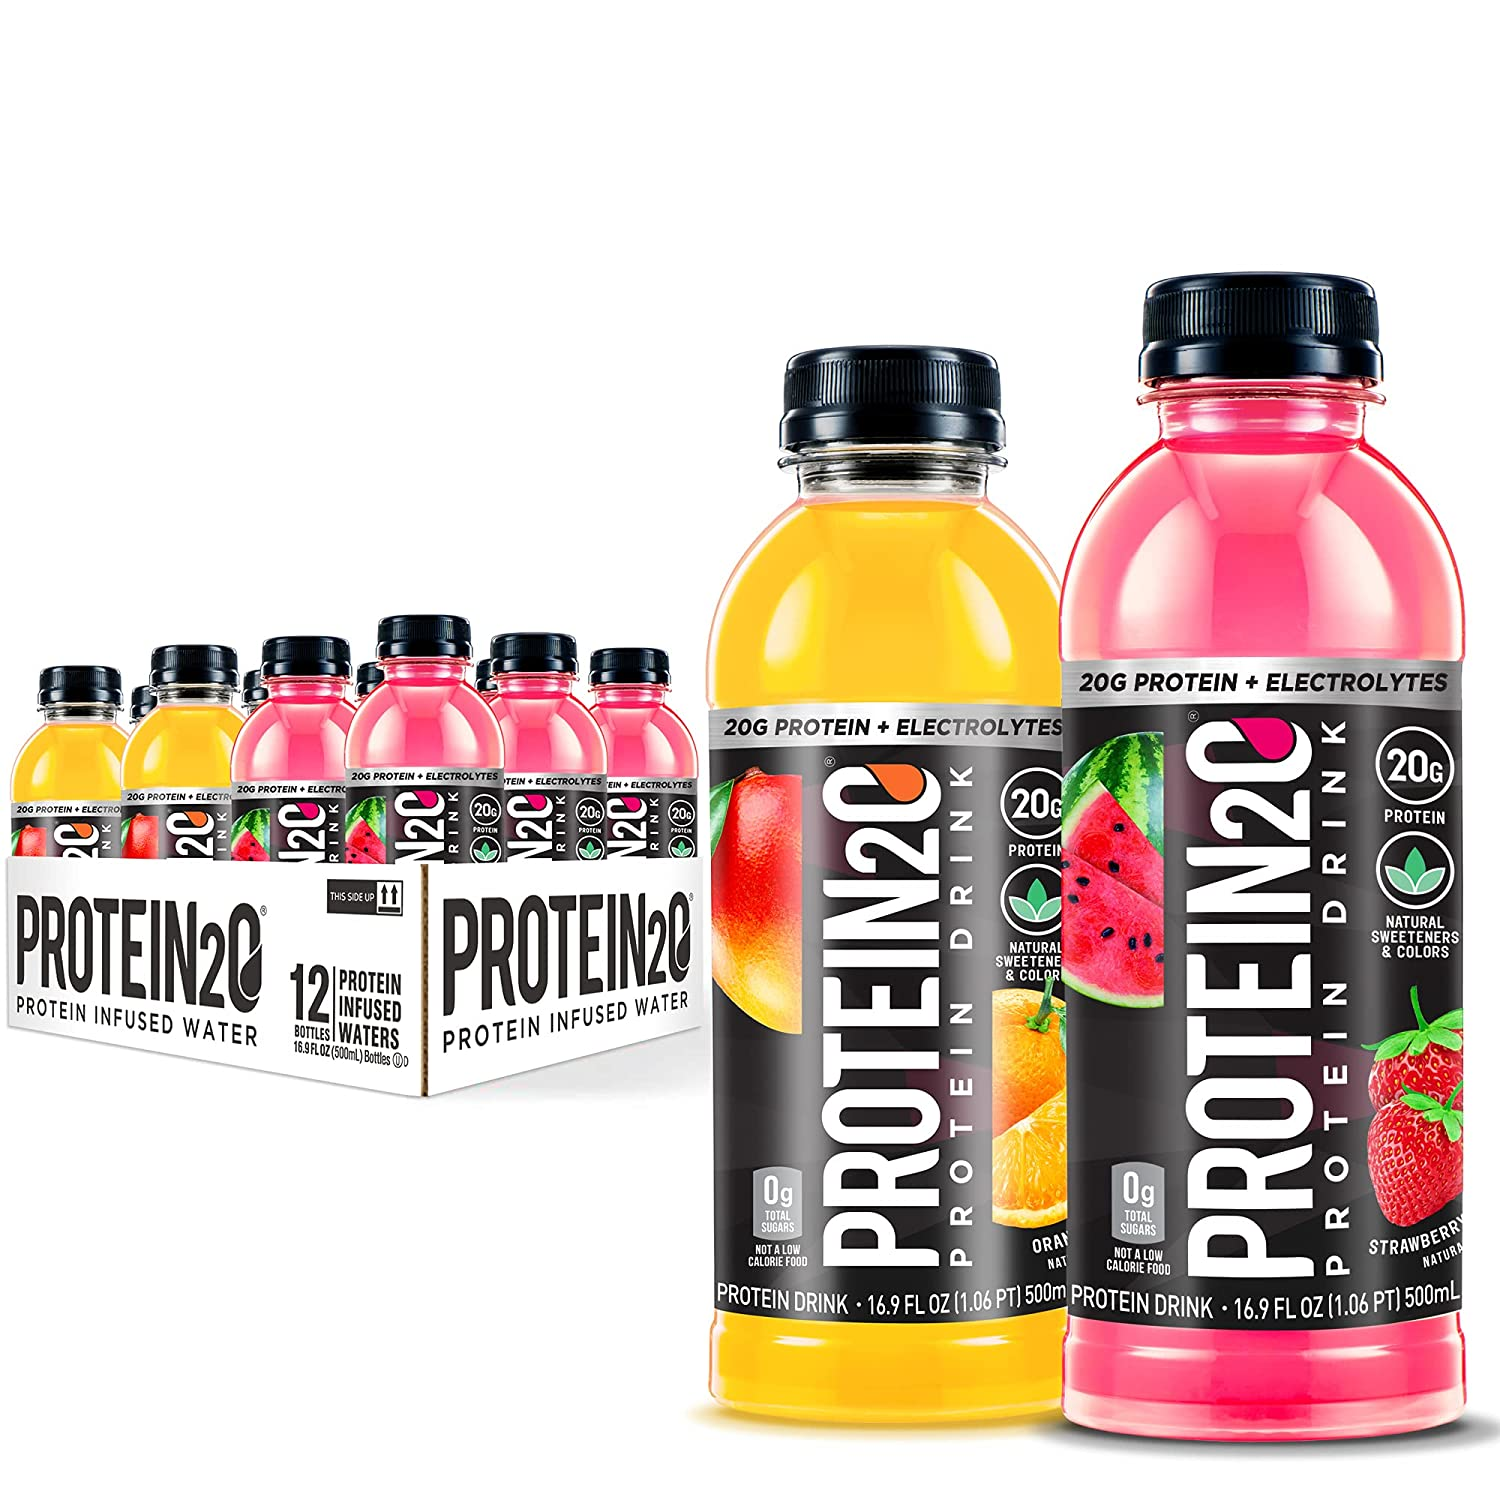 Protein2O + Electrolytes, Low Calorie Protein Infused Water, 15G Whey Protein Isolate, Strawberry Banana, 16.91 Fl Oz (Pack of 12)